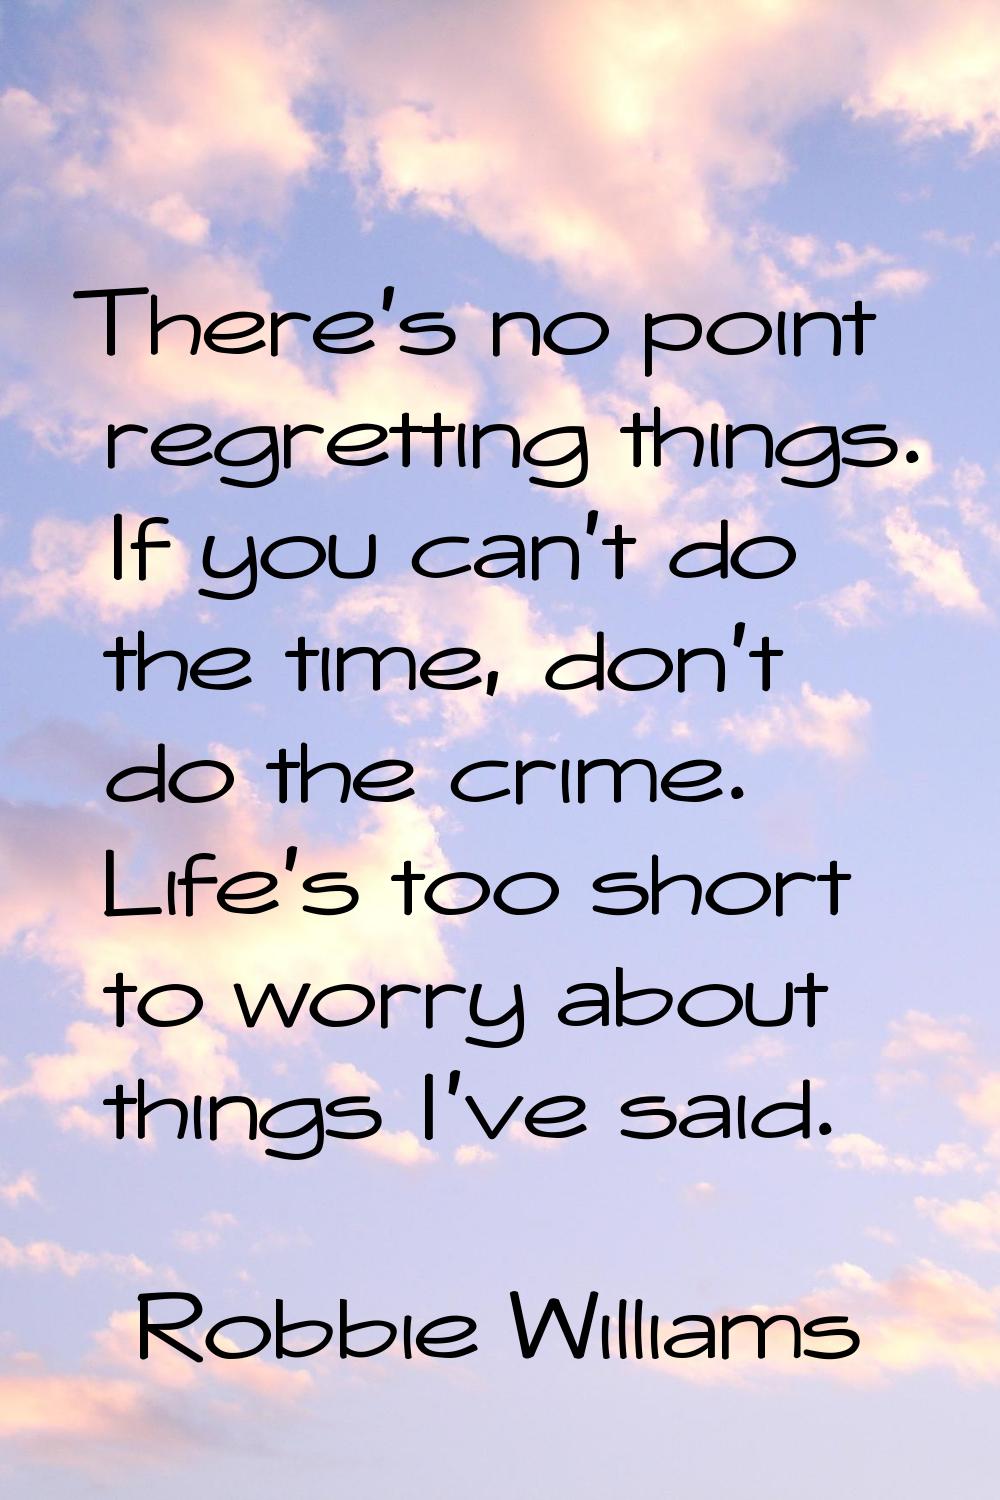 There's no point regretting things. If you can't do the time, don't do the crime. Life's too short 